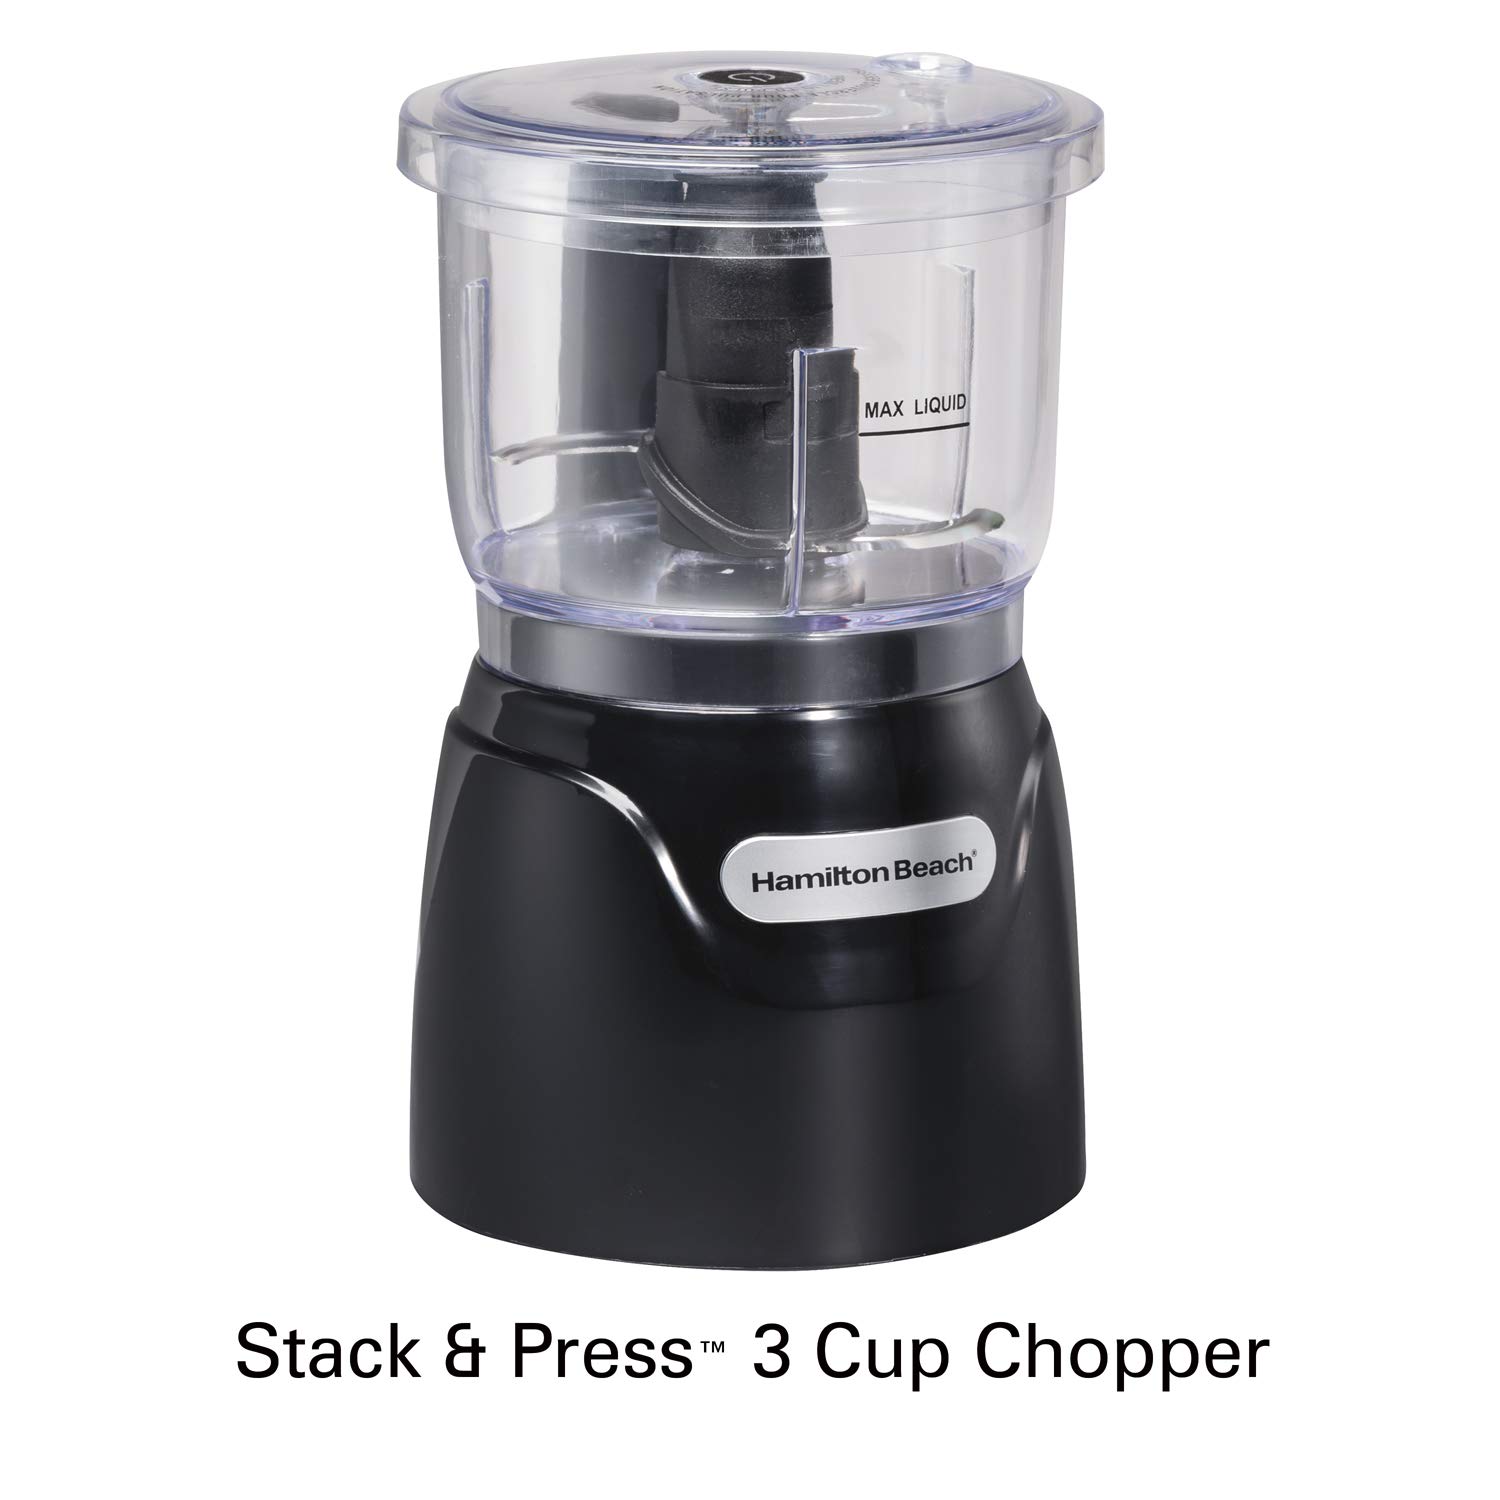 Hamilton Beach Electric Vegetable Chopper & Mini Food Processor, 3-Cup, 350 Watts, for Dicing, Mincing, and Puree, Black (72850)